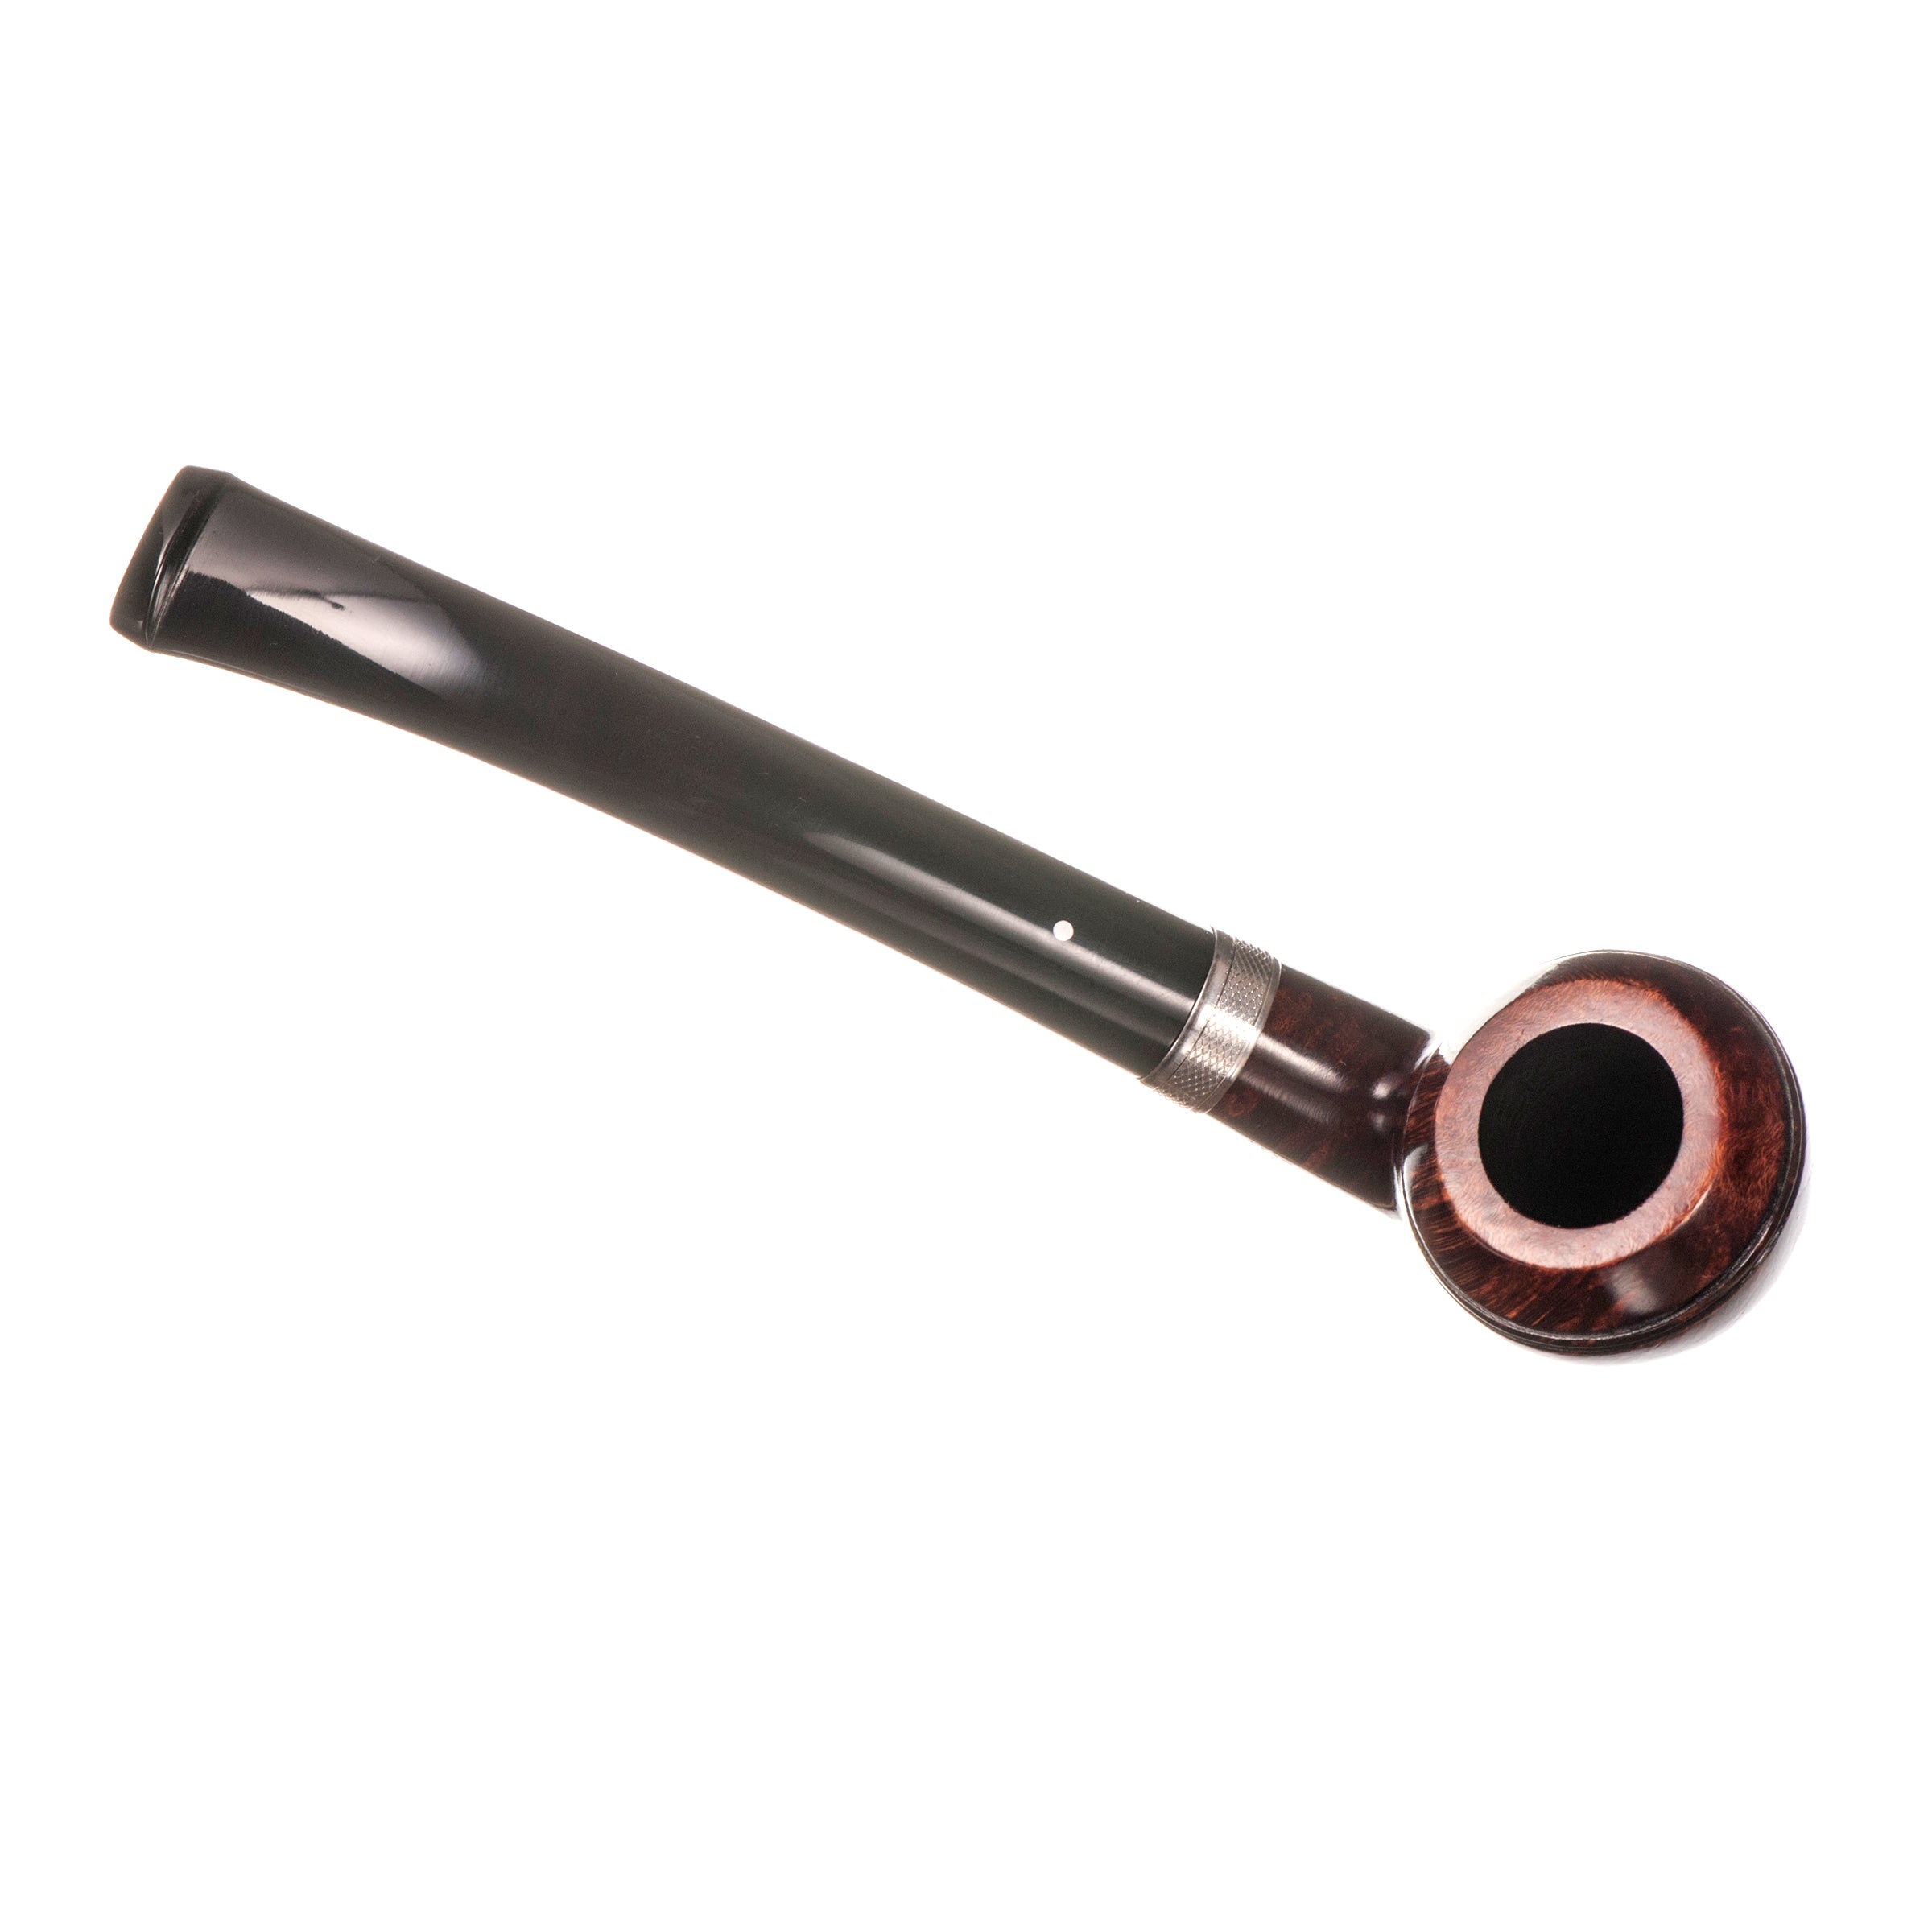 Mary Dunhill Commemorative 2 Pipe Set by Dunhill